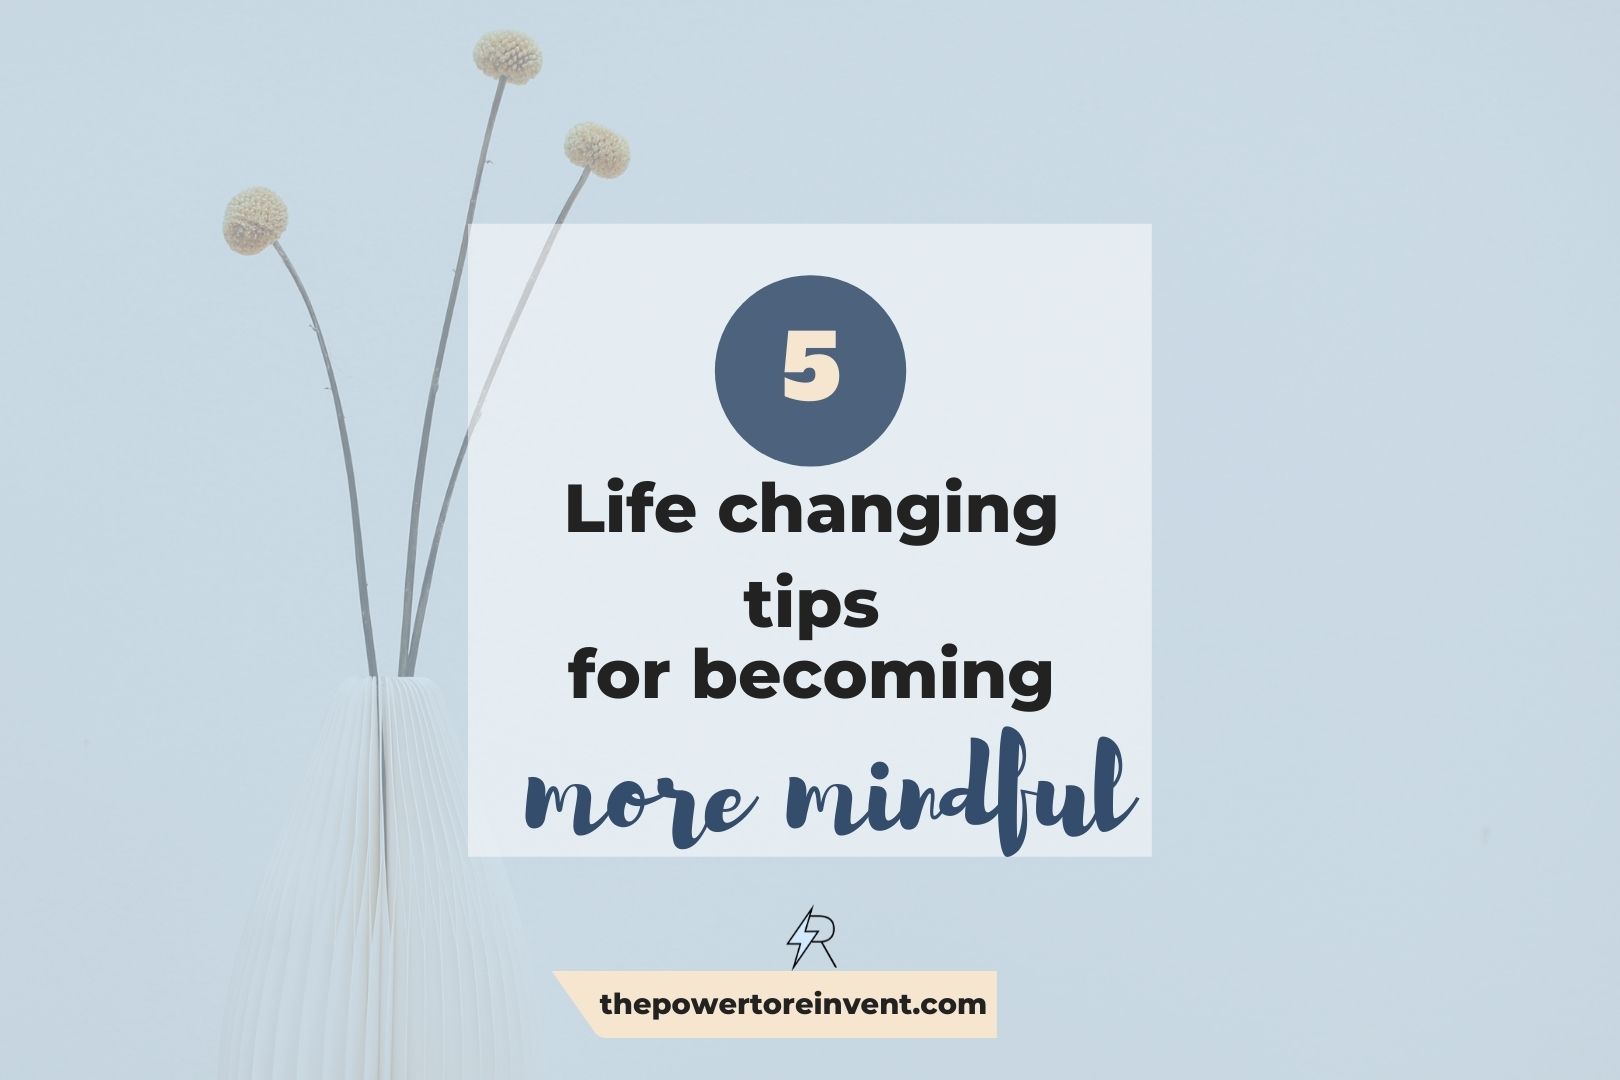 5 life changing tips for becoming more mindful